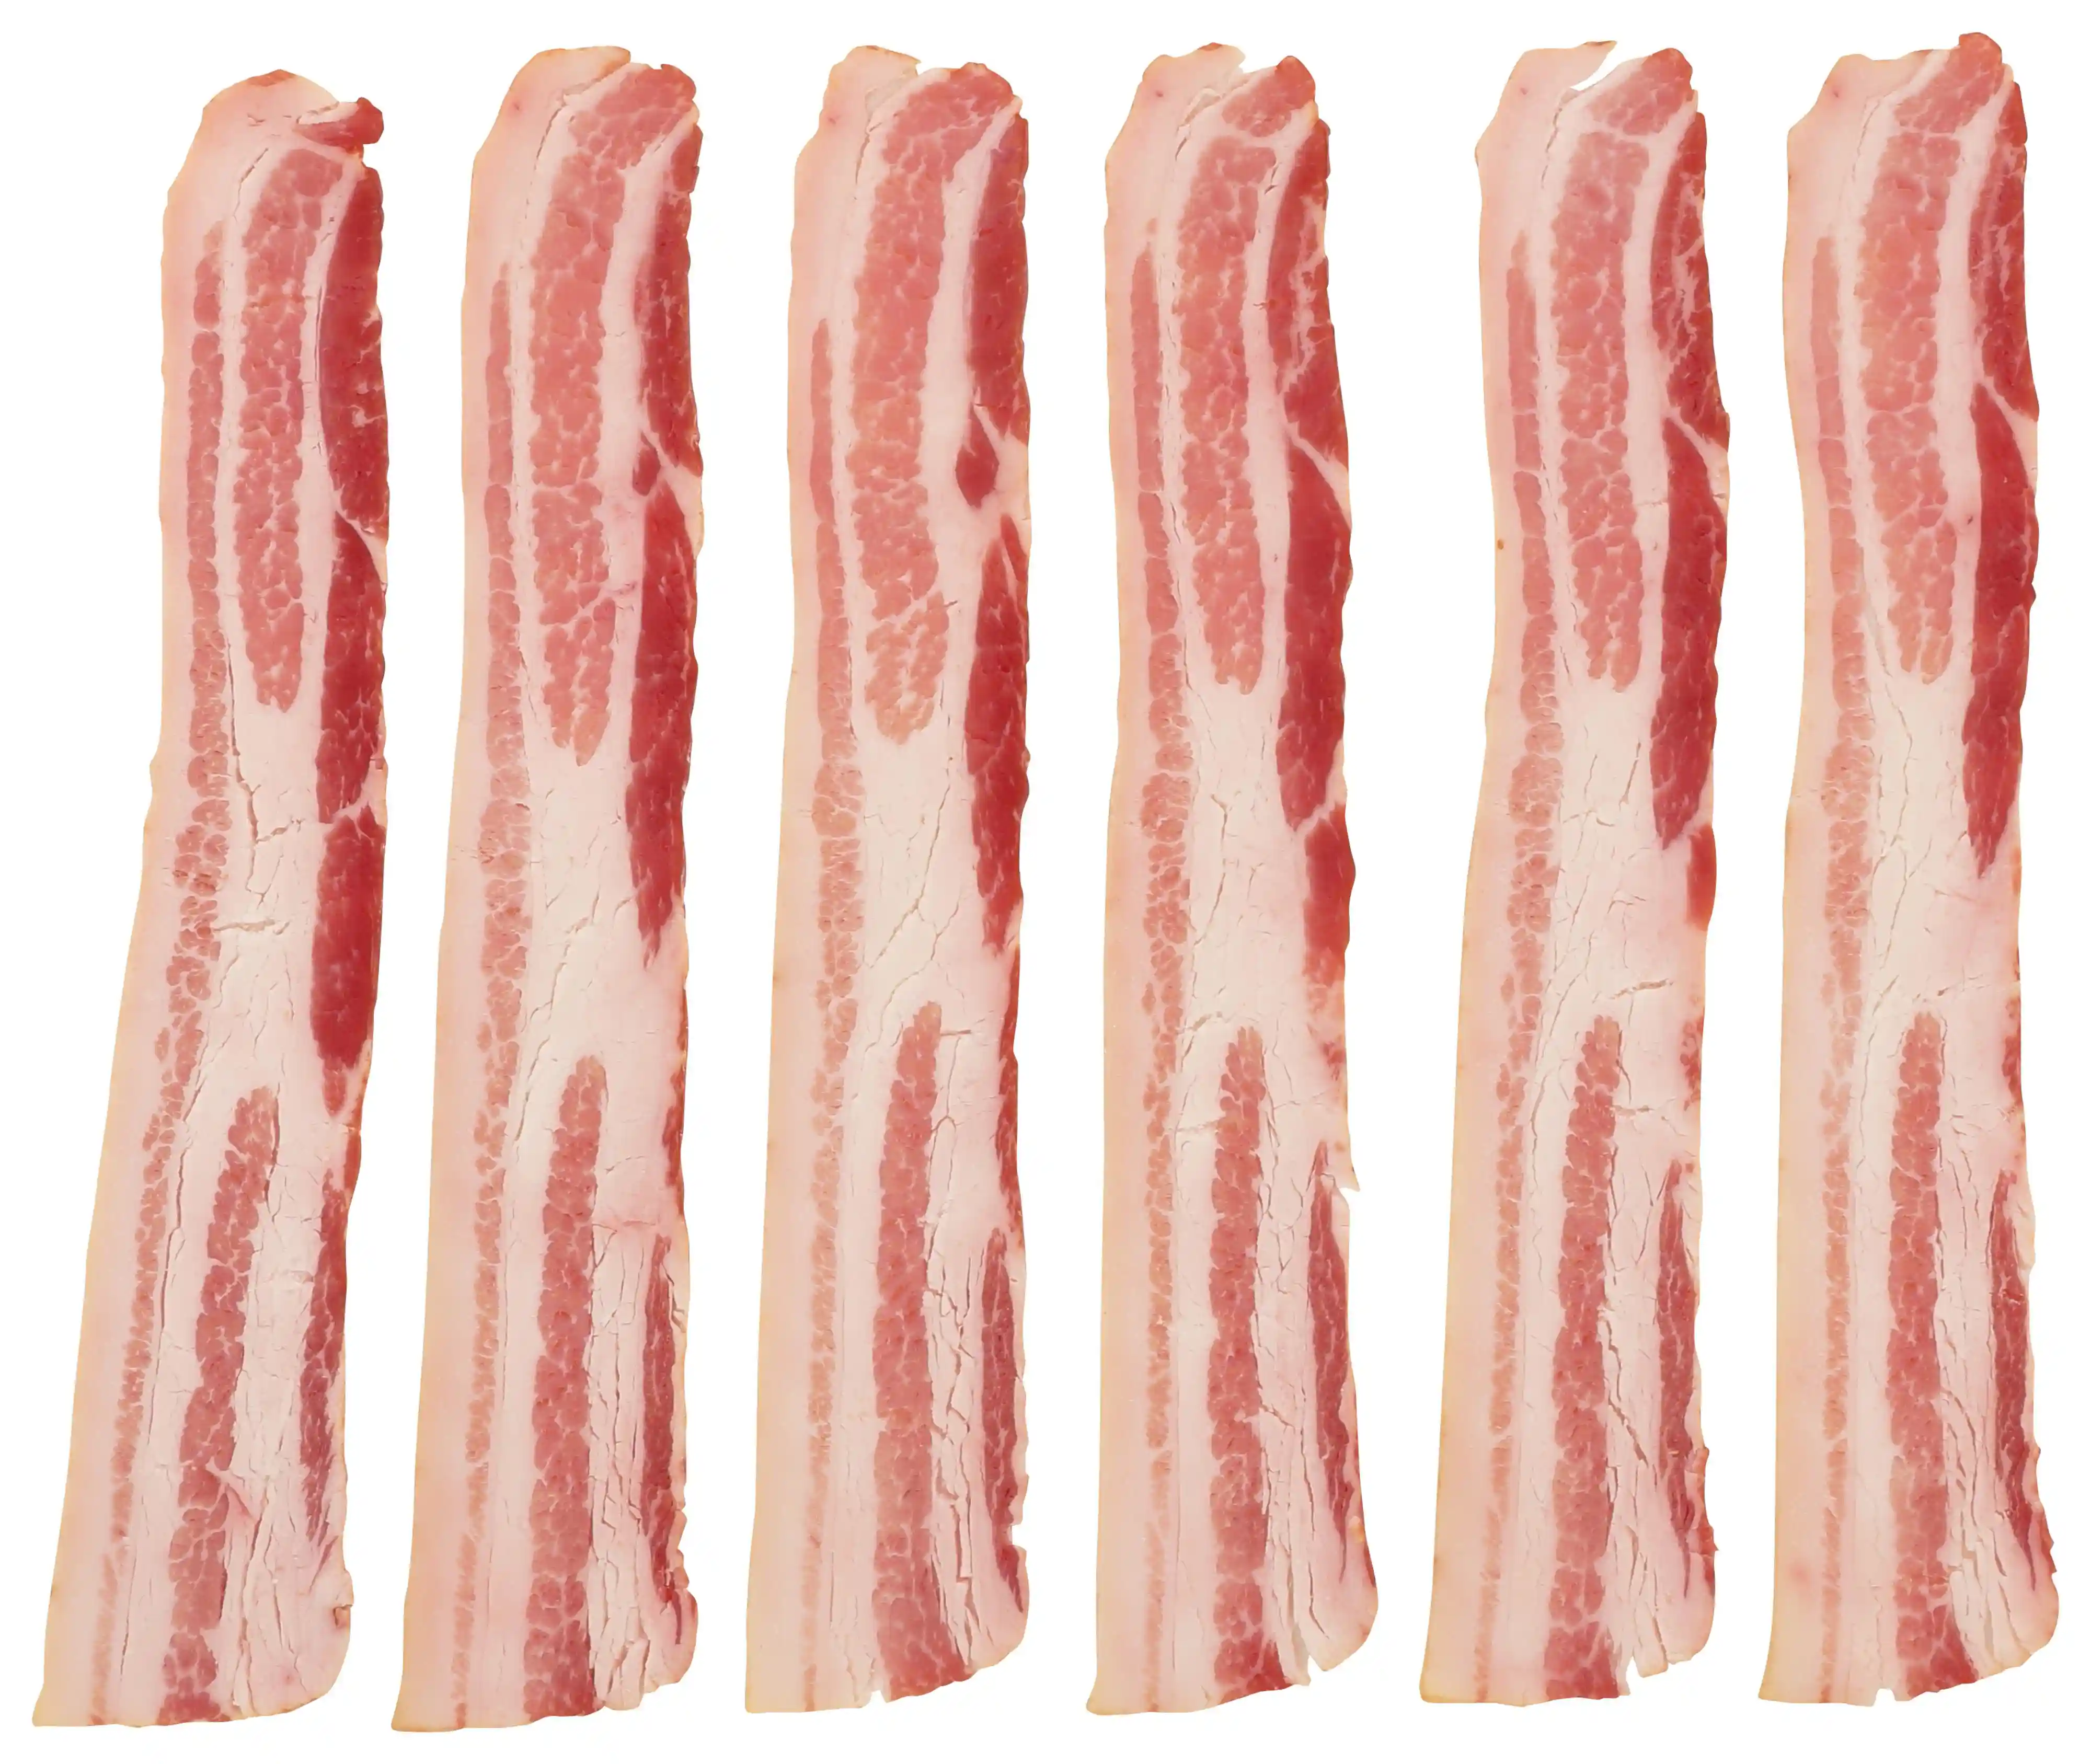 Wright® Brand Naturally Hickory Smoked Thin Sliced Bacon, Flat-Pack®, 15 Lbs, 18-22 Slices per Pound, Gas Flushed_image_21